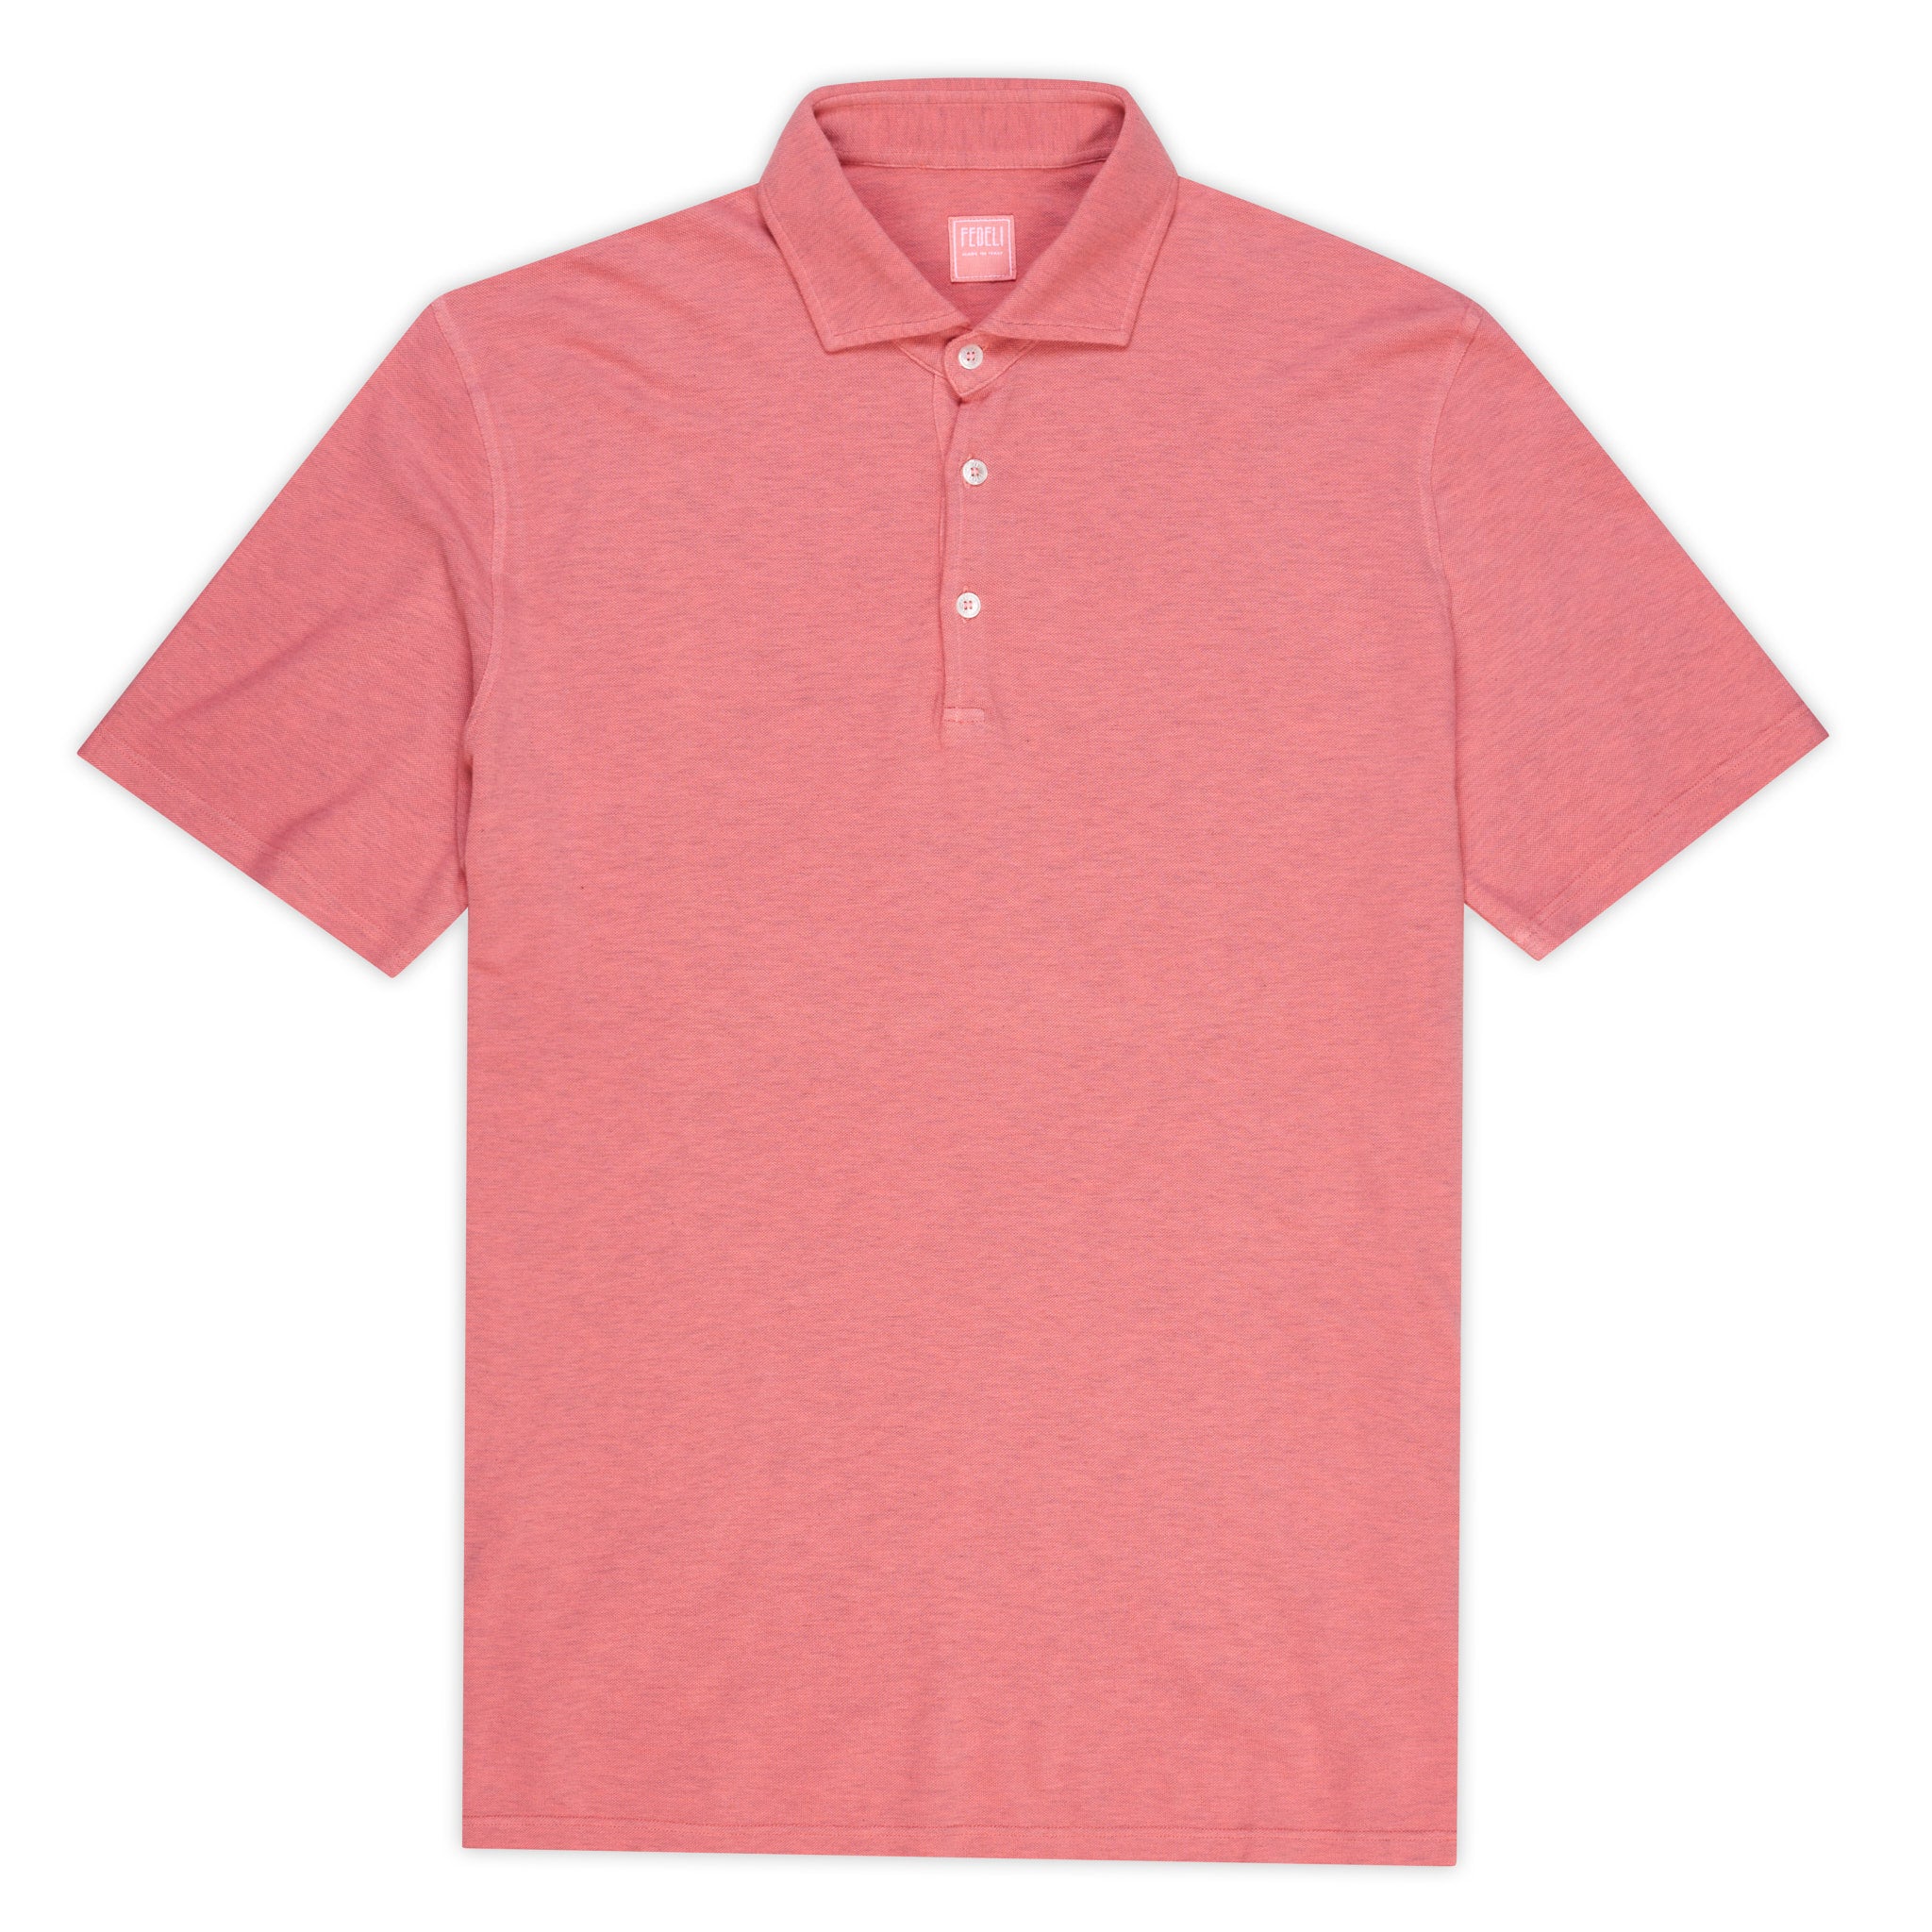 FEDELI Tommy Heather Punch Pink Cotton Short Sleeve Pique Polo Shirt NEW FEDELI